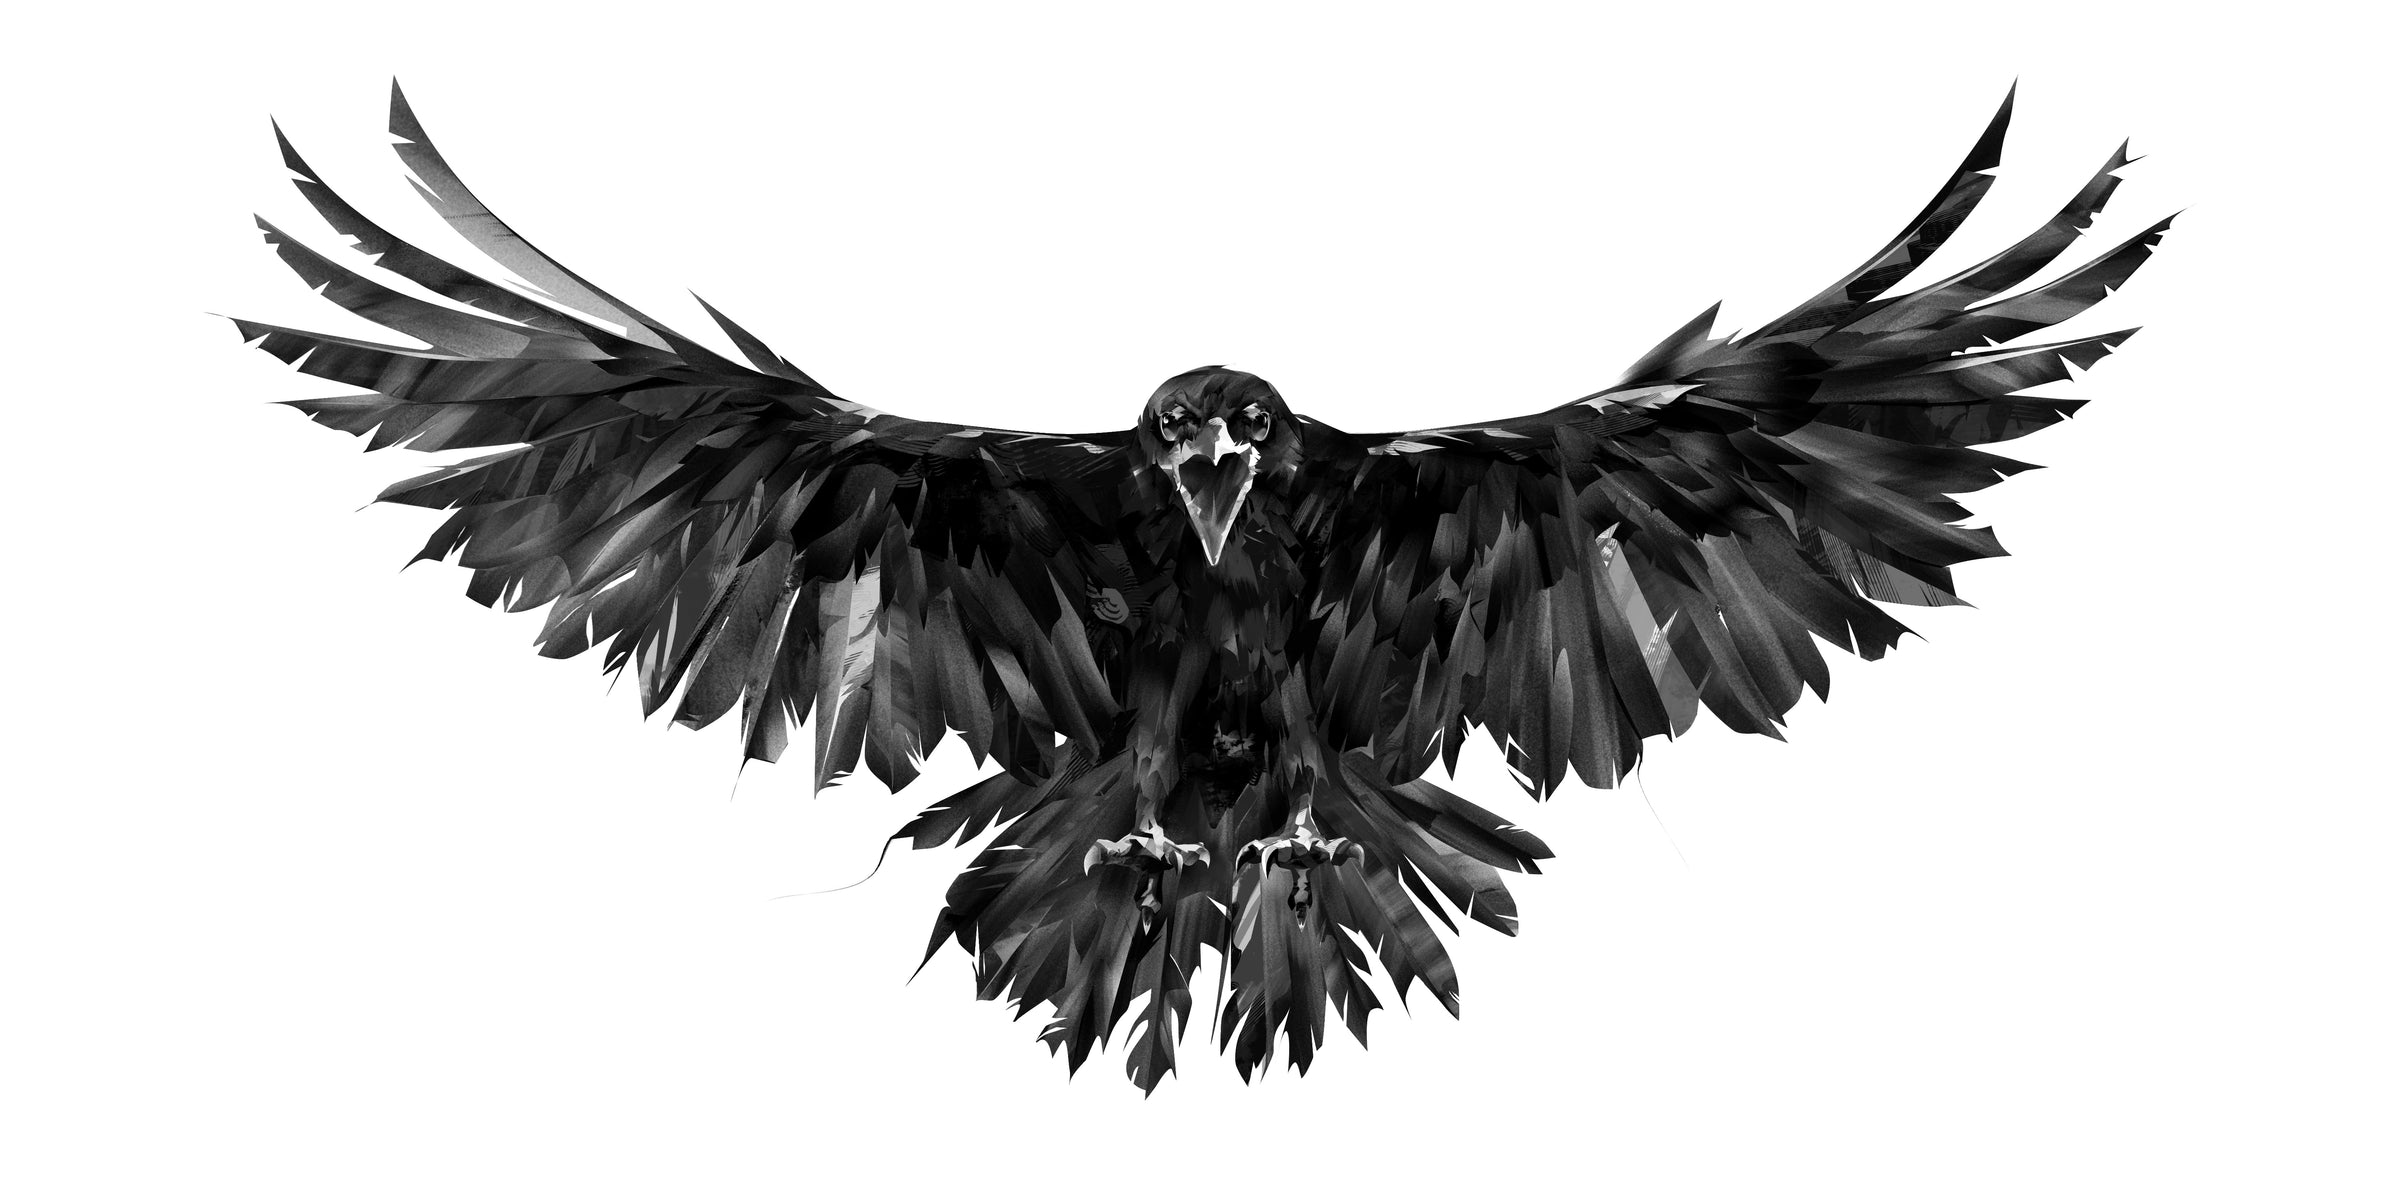 Raven soaring in the air. Viking omen. Raven Code by Valhalla Legend Viking Beard Care made in Canada